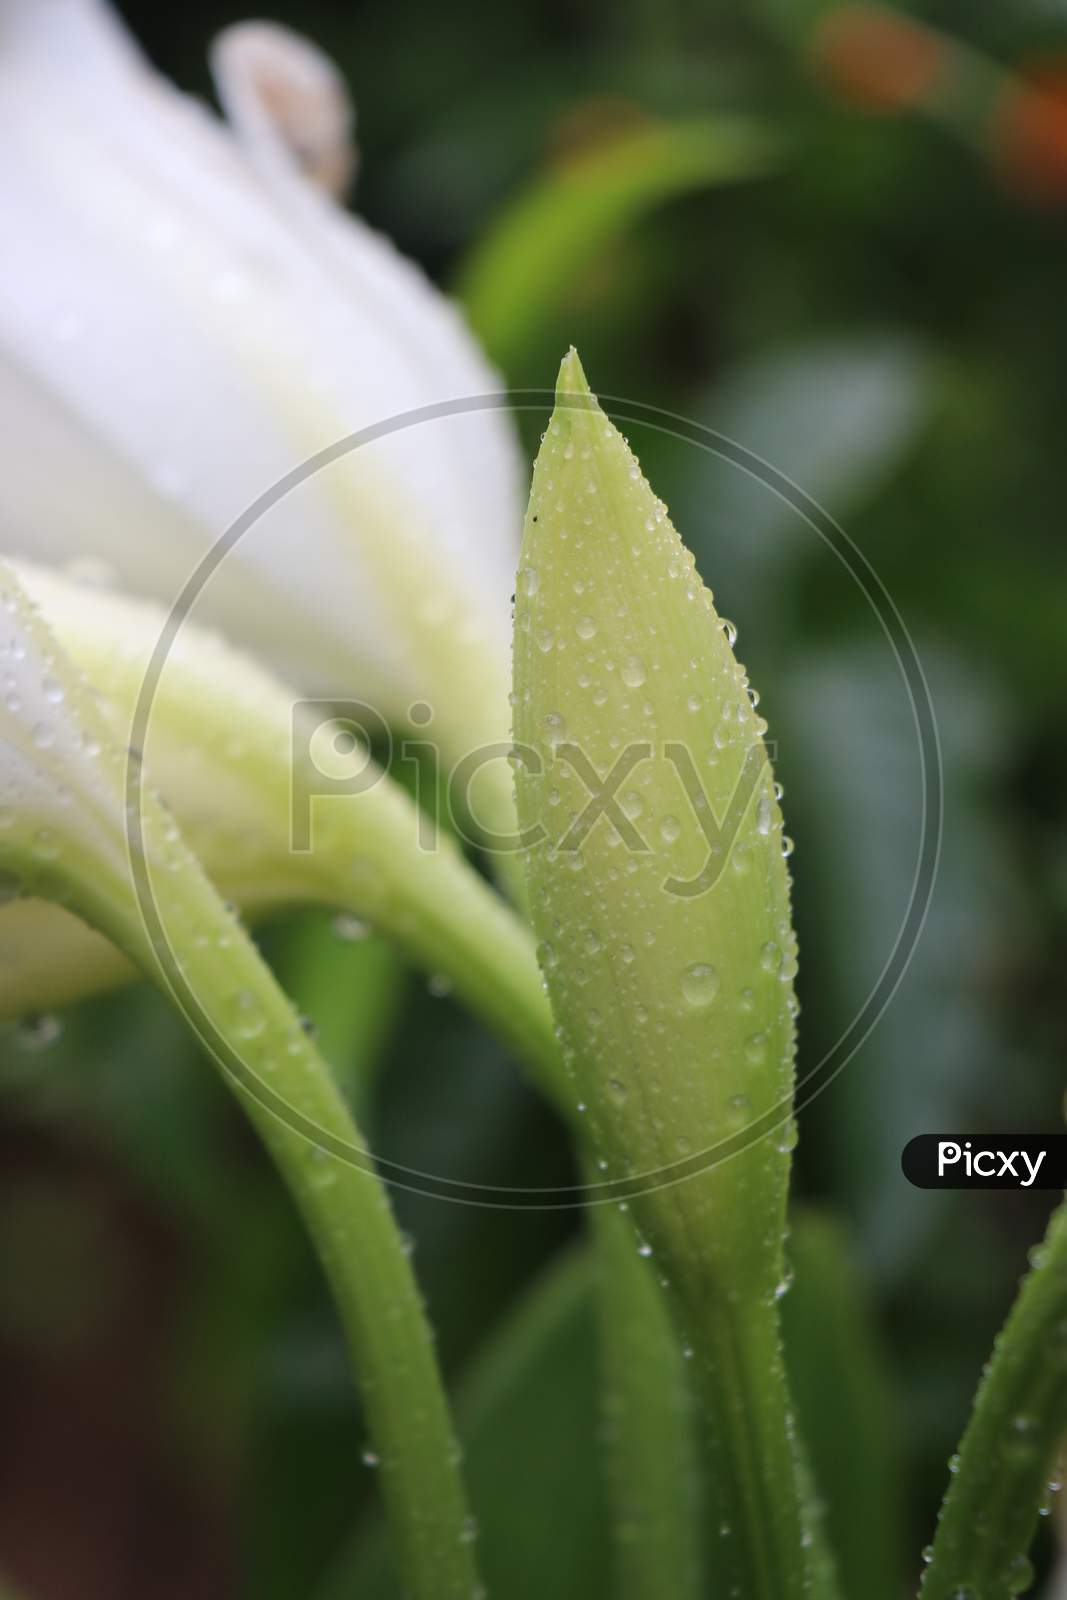 Flower Bud Of White Tulip Flower Which Is Fresh And Having Dew Drops